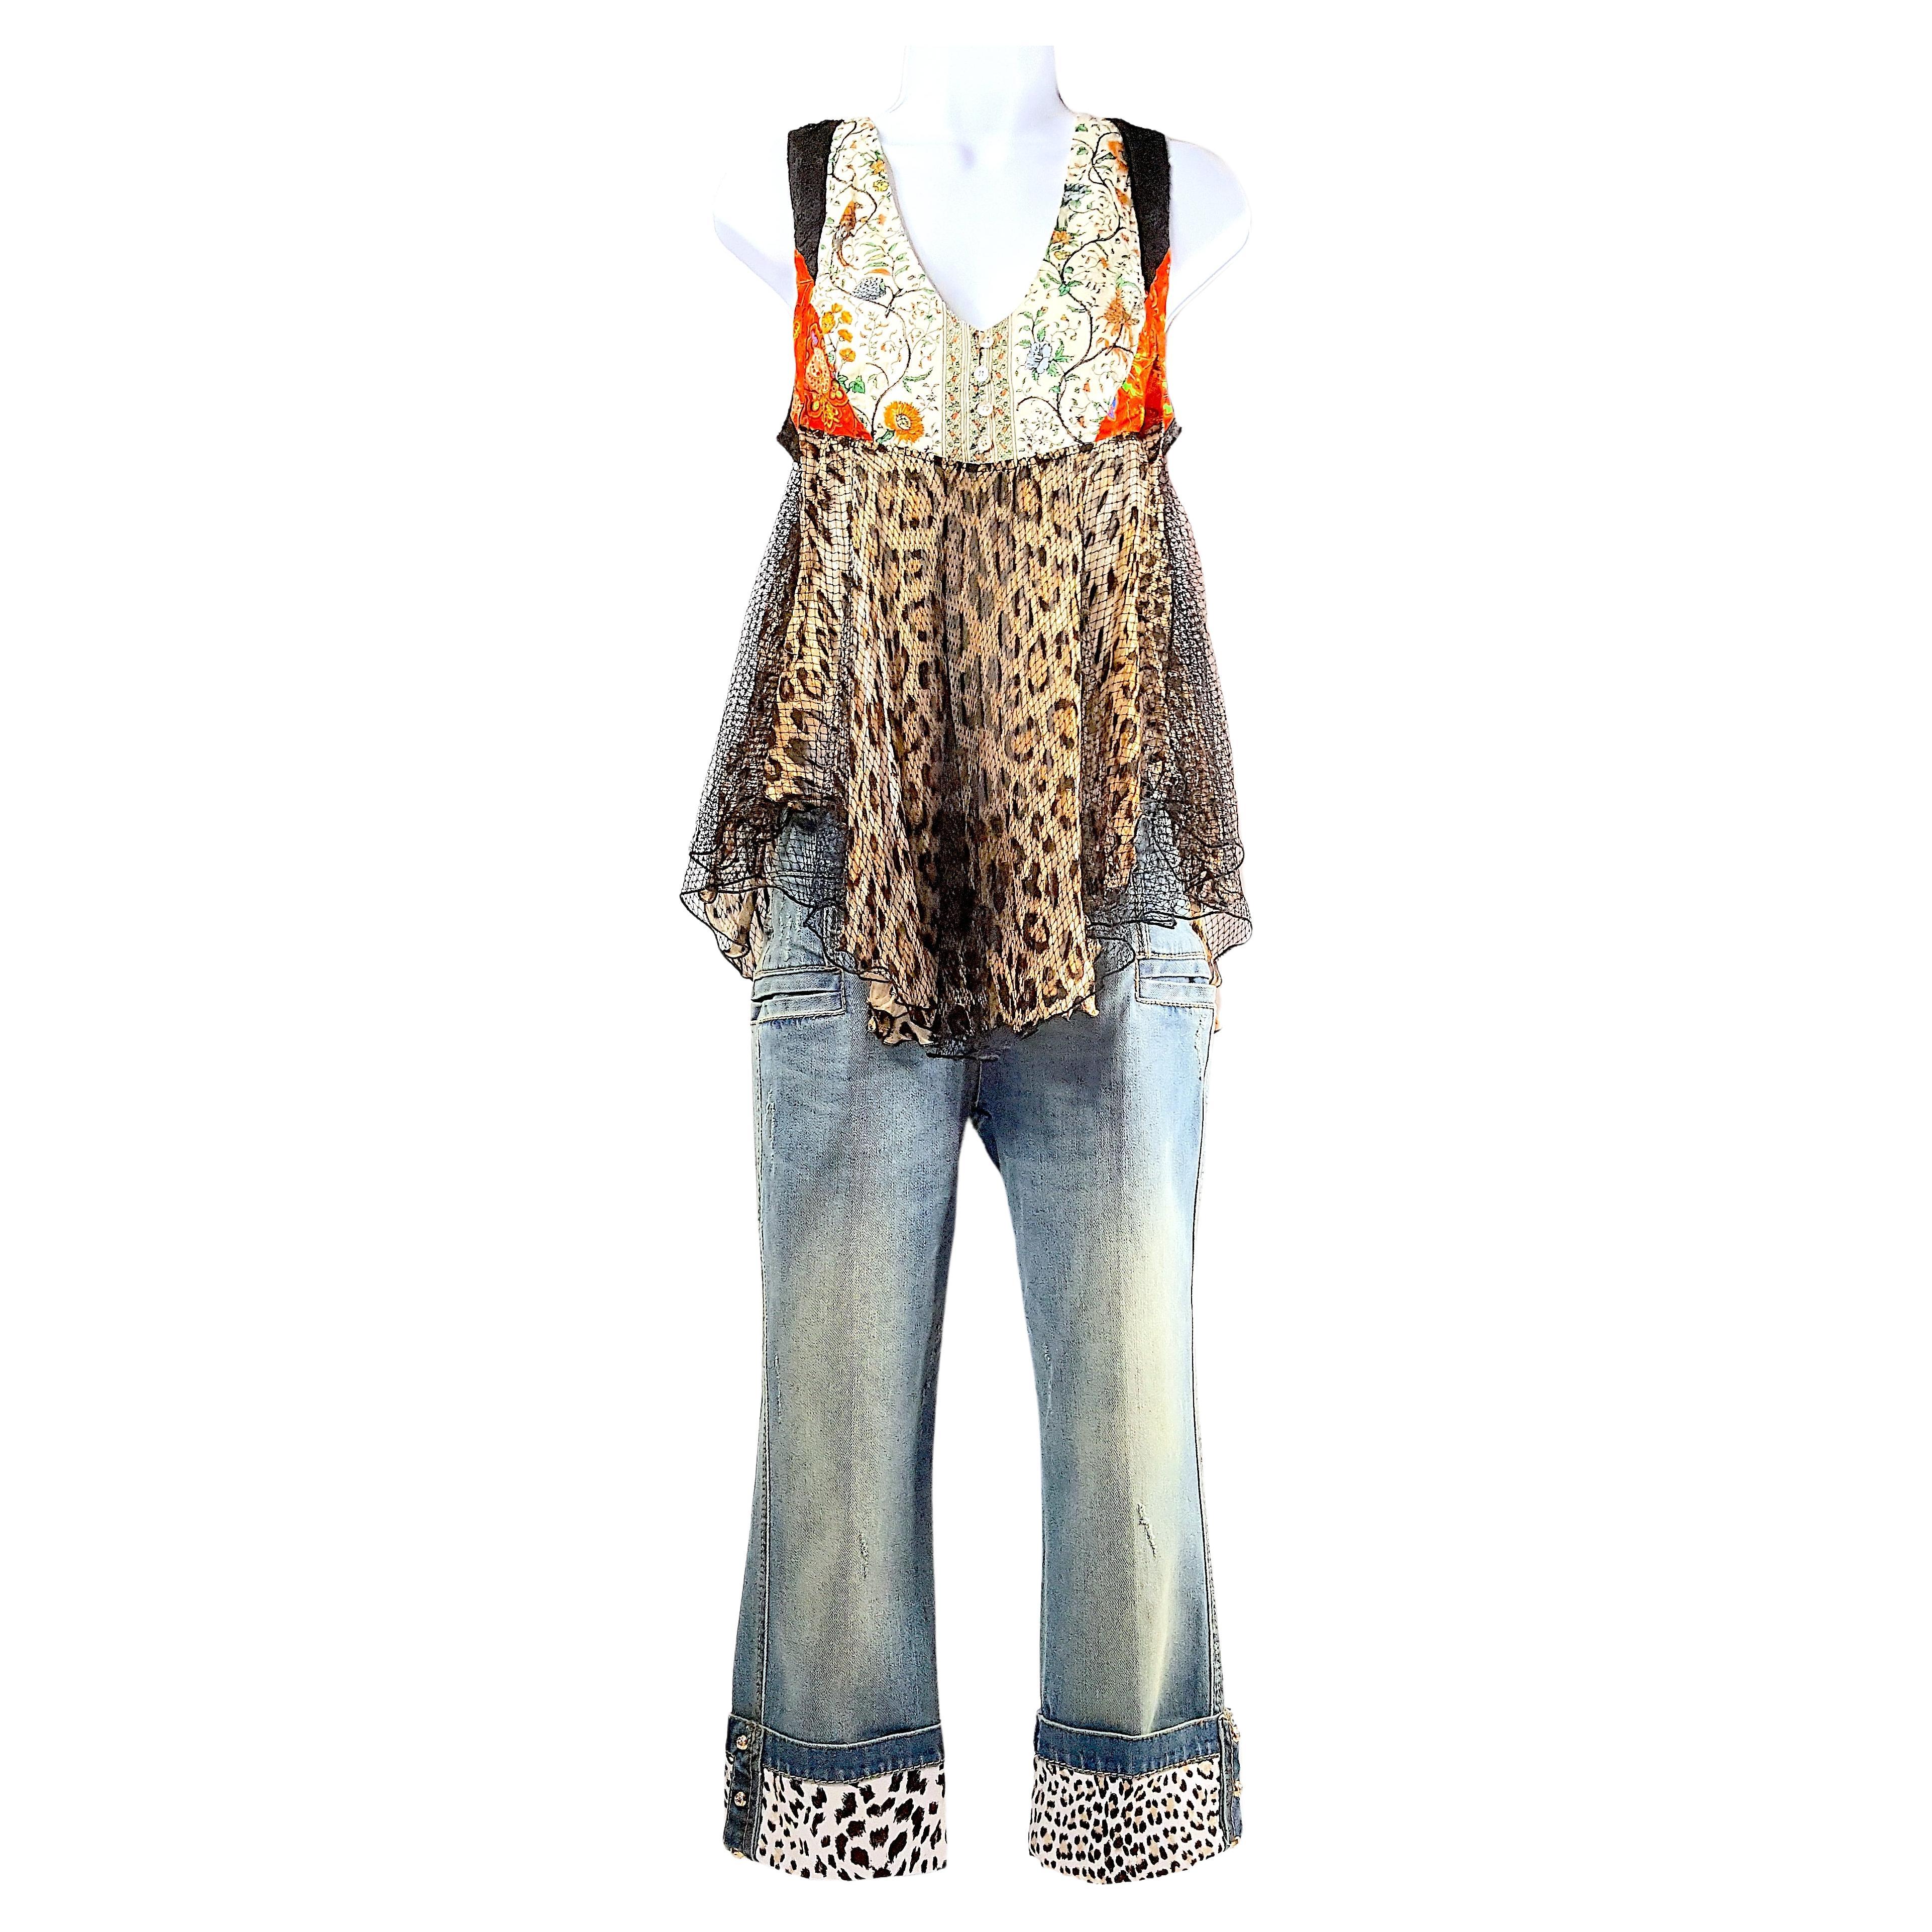 Cavalli S/S 2003 Embellished SilkLeopard Set SequinsNetBlouse & CuffedCapriJeans In Good Condition For Sale In Chicago, IL